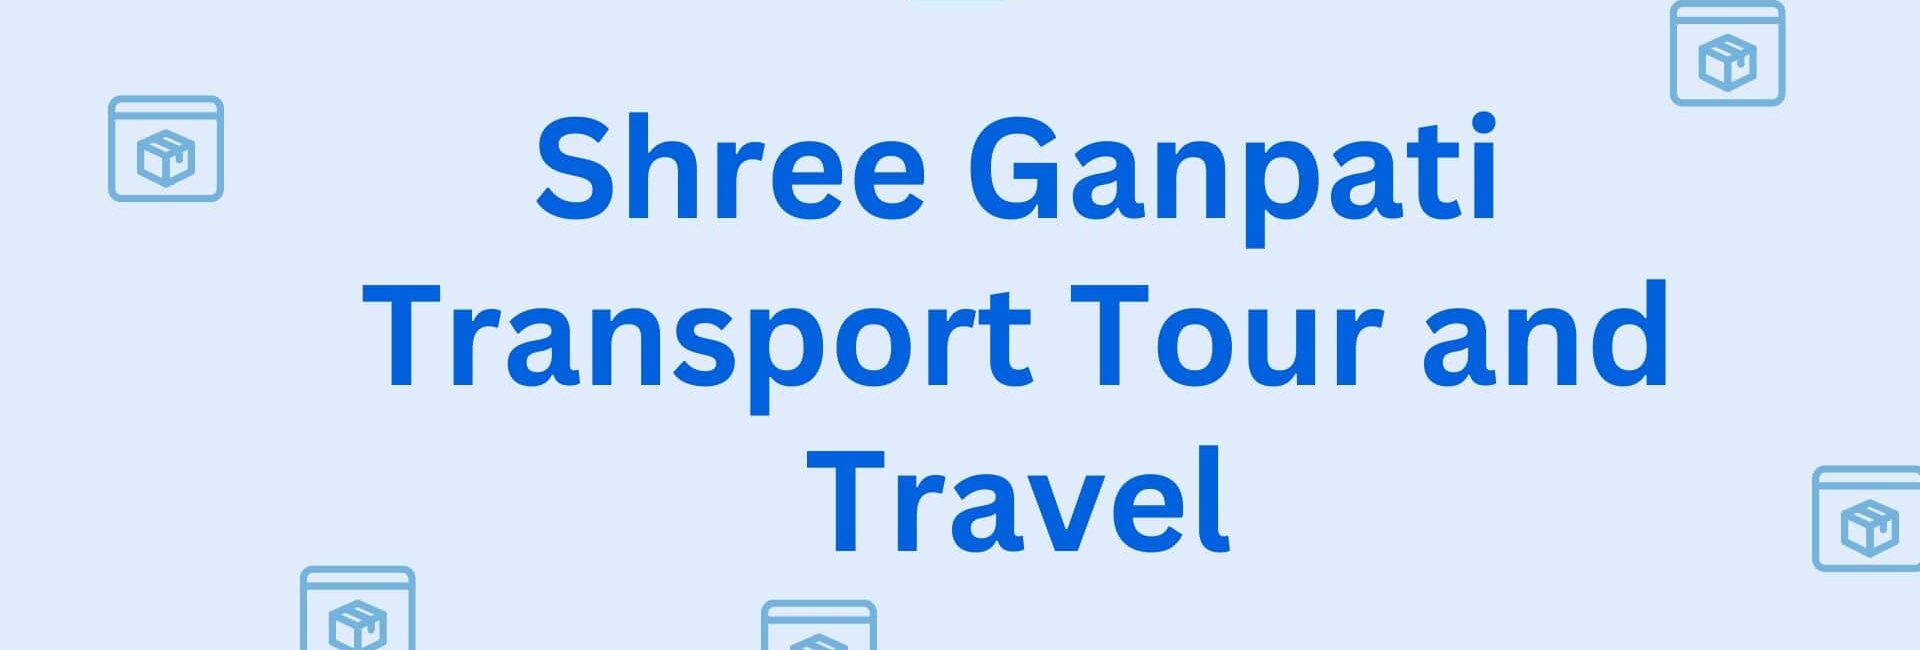 Shree Ganpati Transport Tour and Travel - Packers and Movers in Hisar